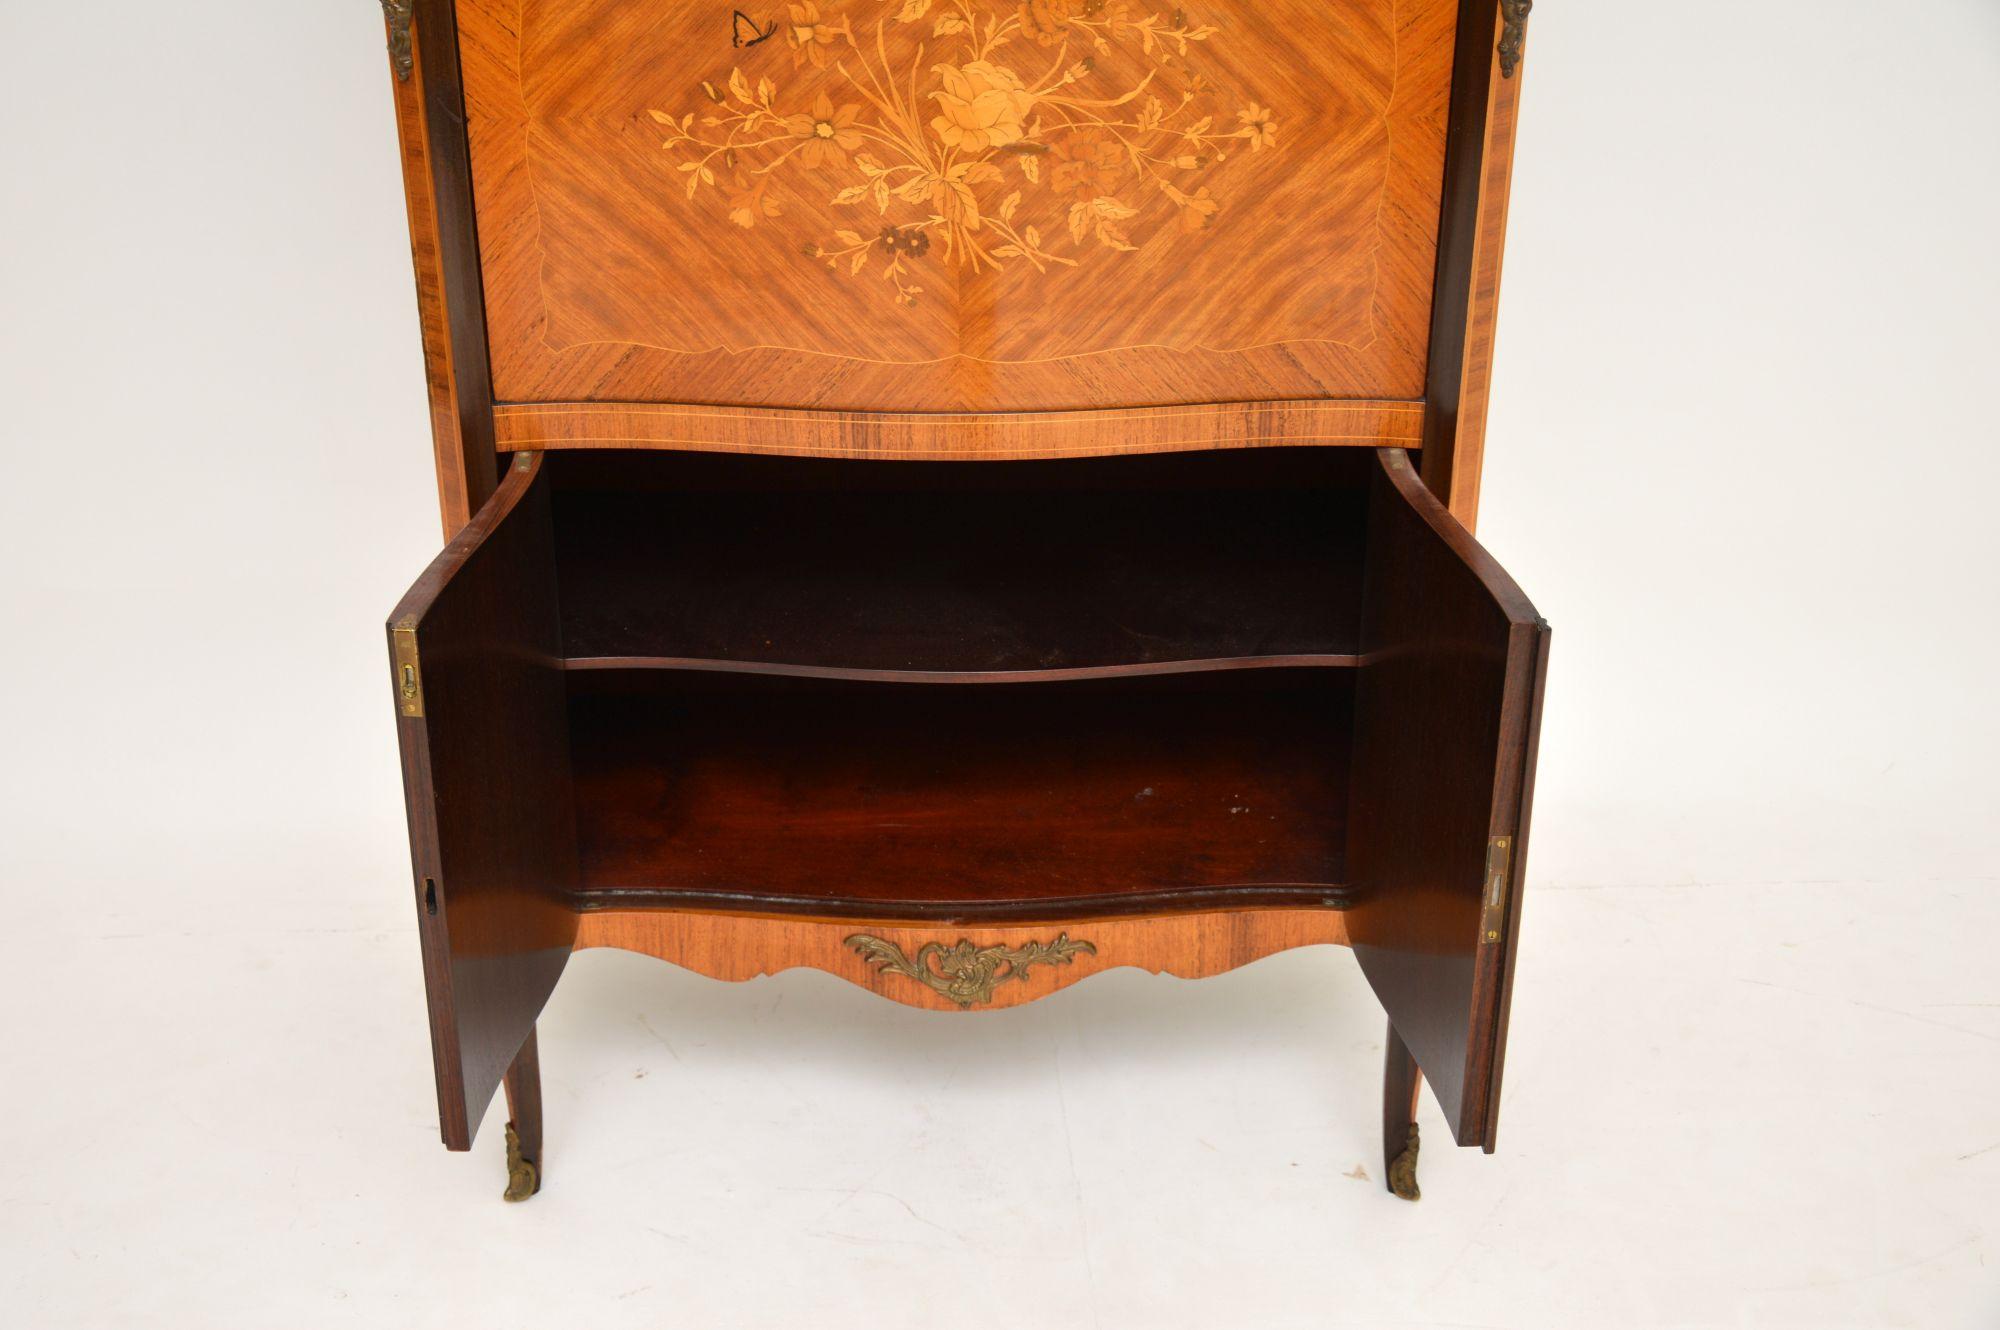 20th Century Antique French Inlaid Marquetry Drinks Cabinet